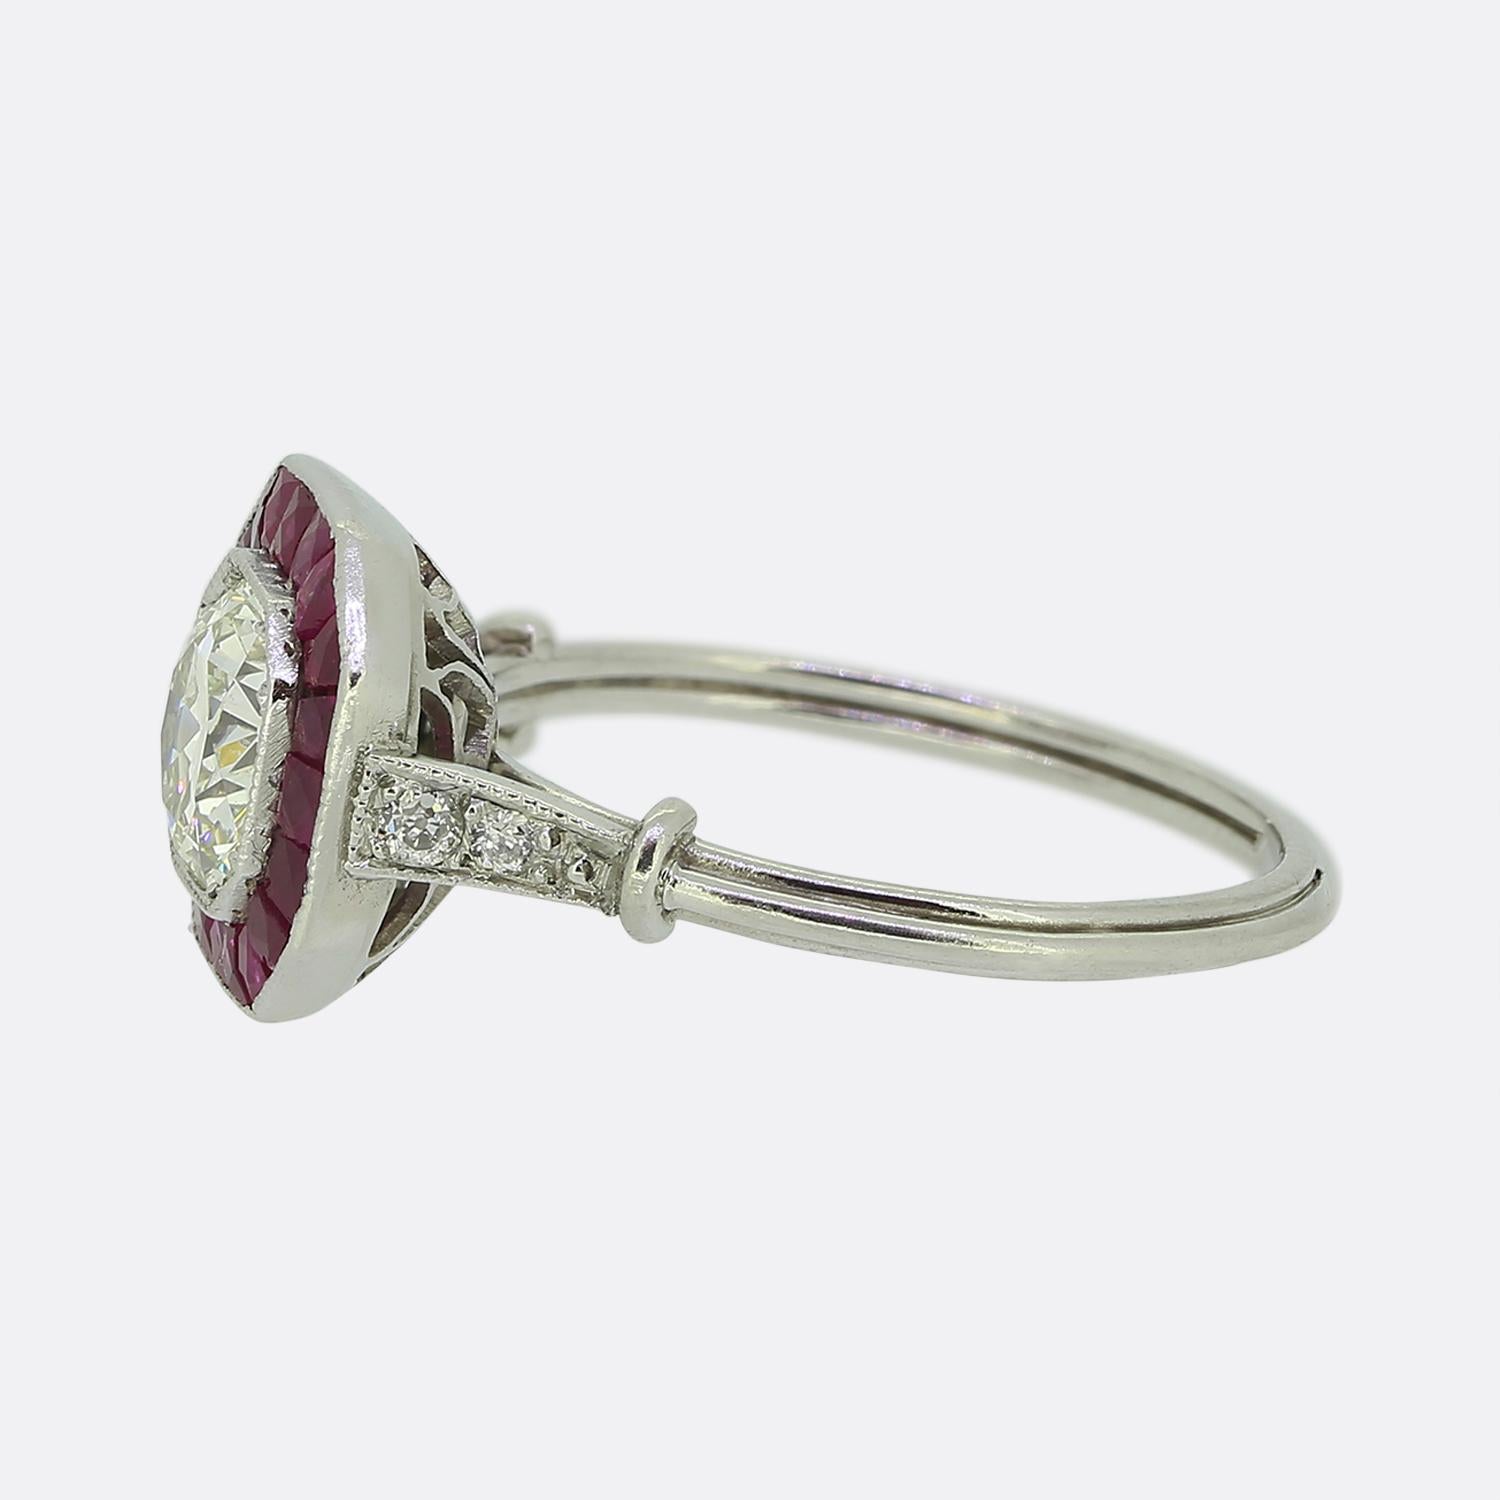 Here we have a truly wonderful diamond and ruby target ring. This vintage ring has been handcrafted in platinum and features a central old European cut diamond of Approximately 0.80 carats. The surrounding rubies have been calibre cut to fit this